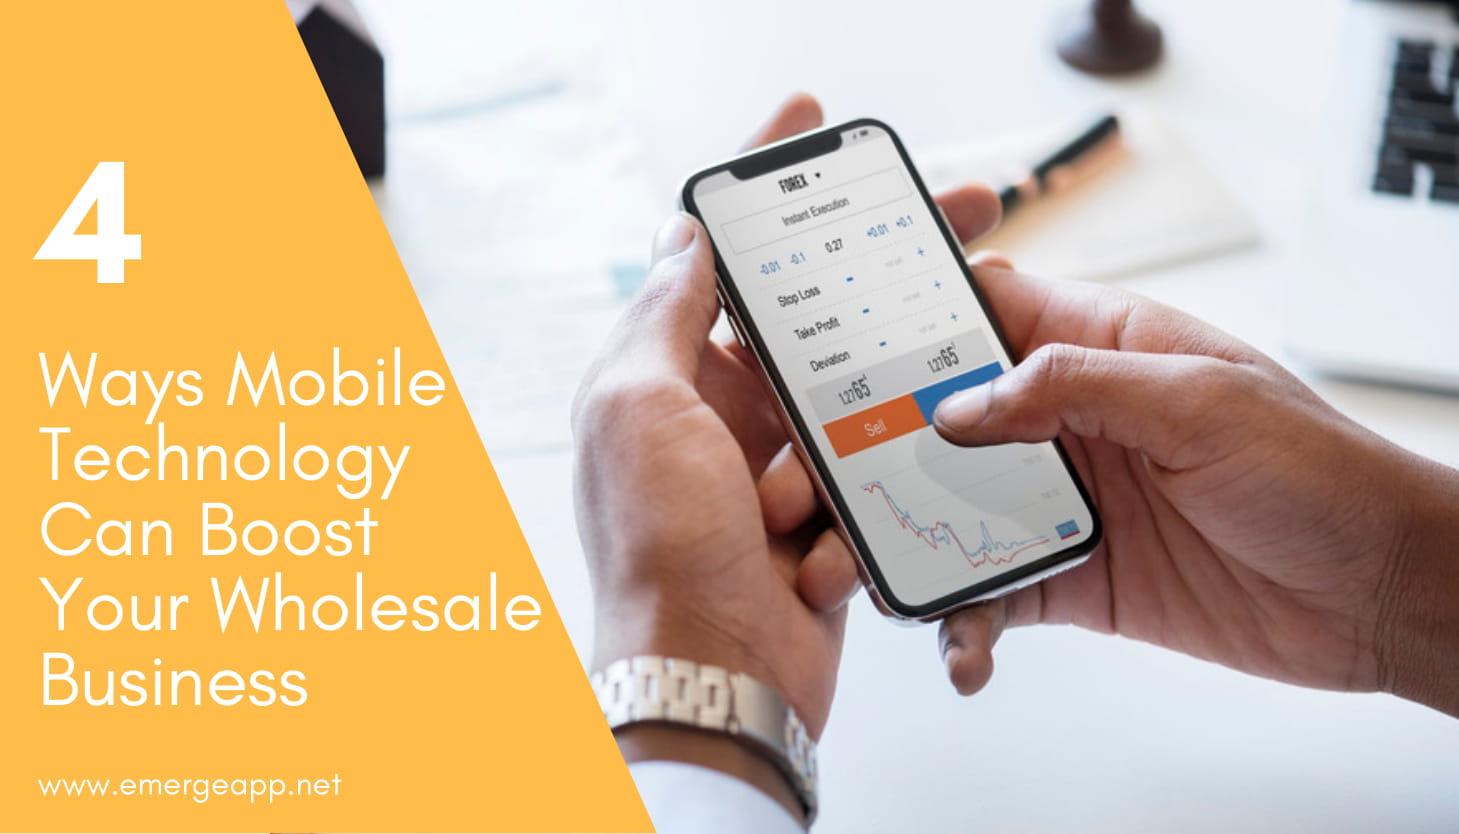 Mobile Technology Can Boost Your Wholesale Business